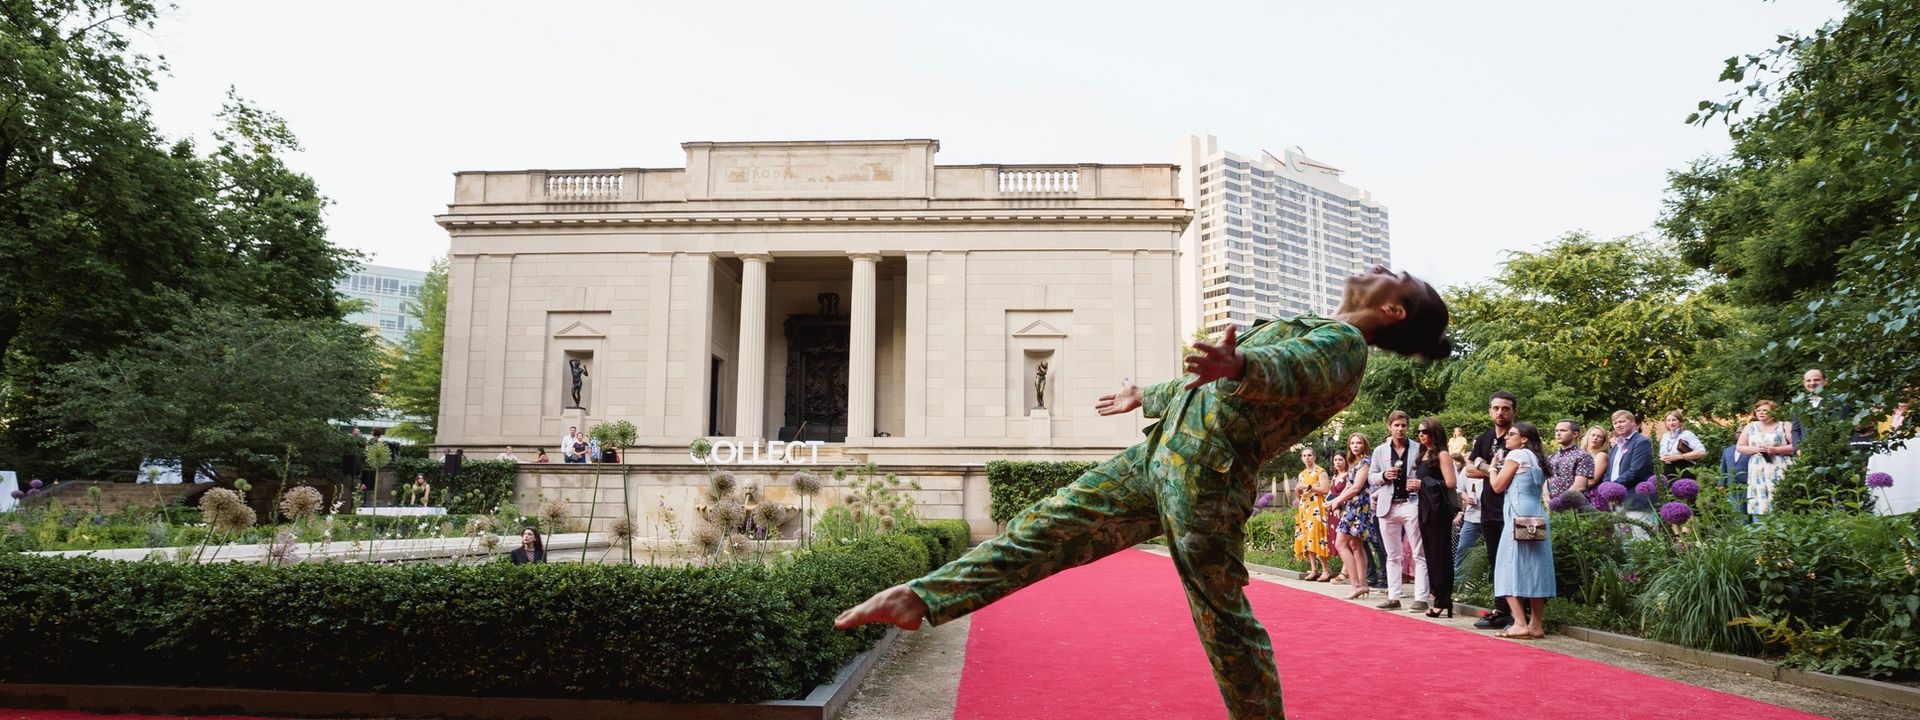 Performer dancing outside the Rodin Museum during a Collect members event